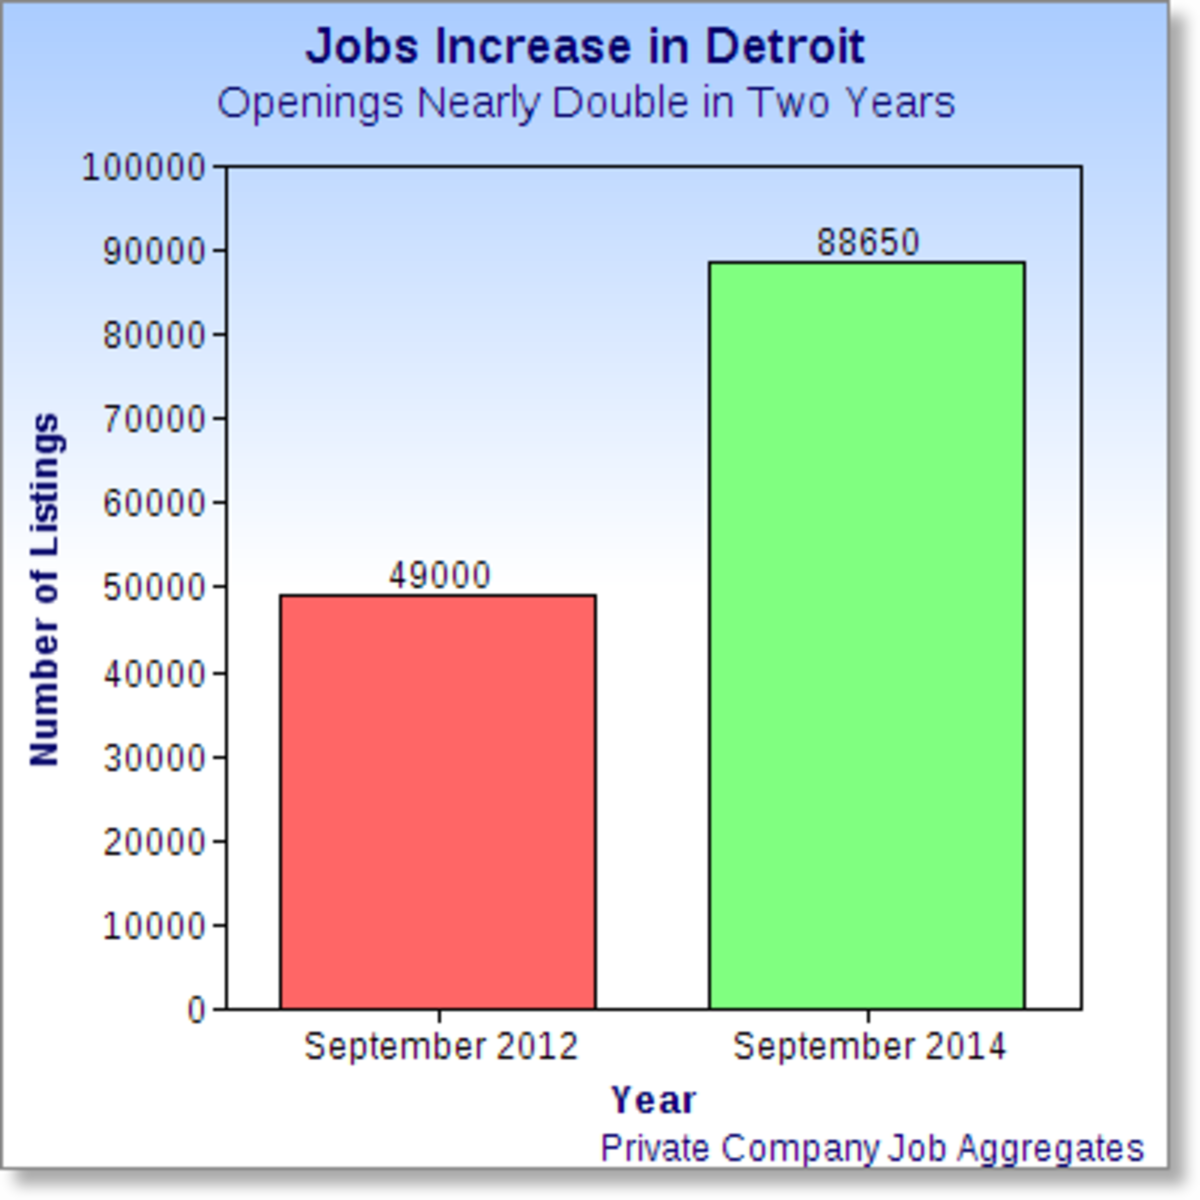 A recent previous job surge for the Greater Detroit Area.